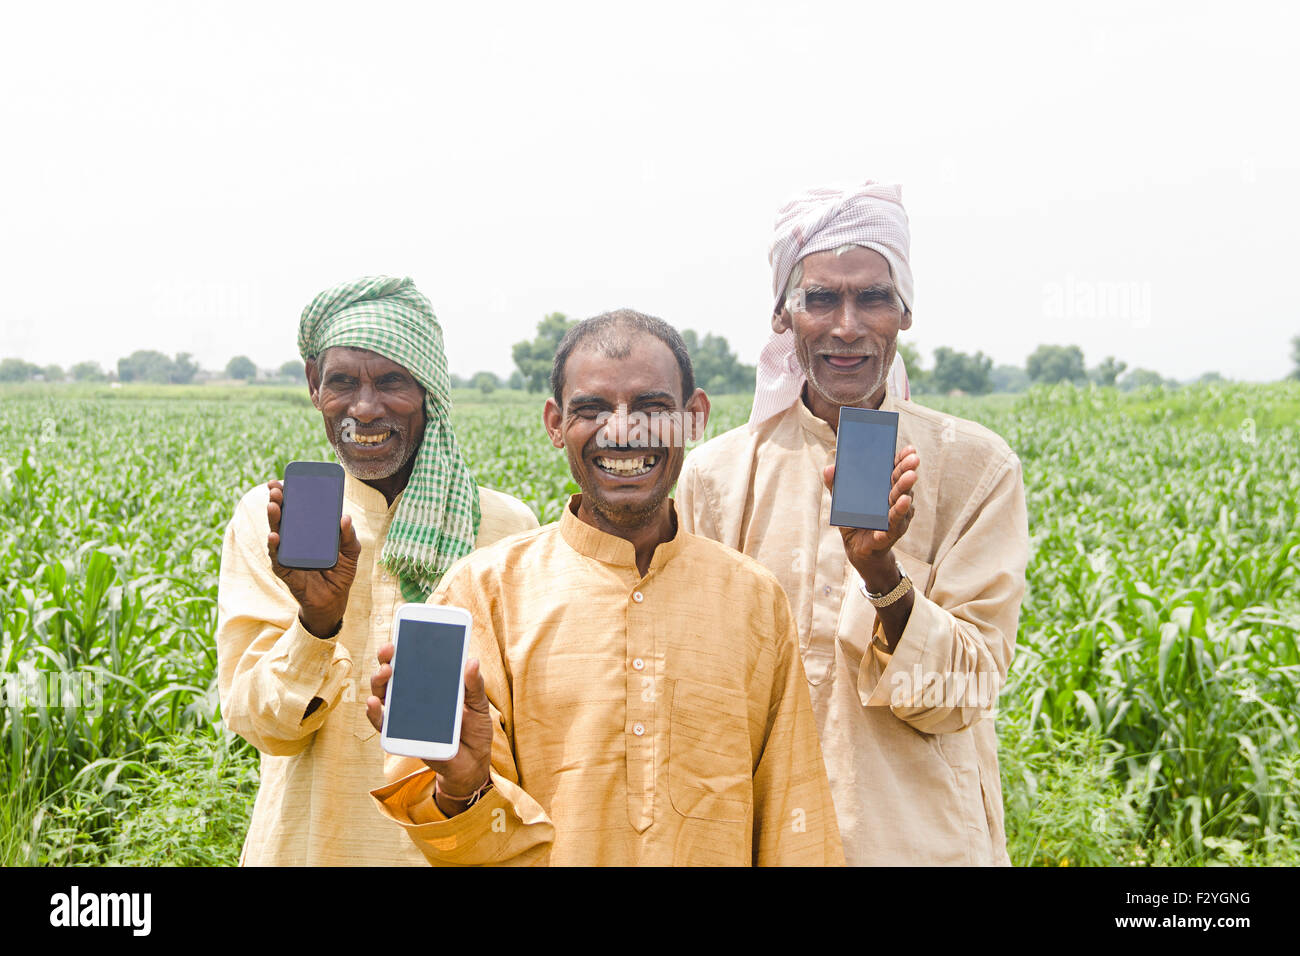 3 Indian Rural Farmer Farm Mobile Phone Quality Showing Stock Photo Alamy